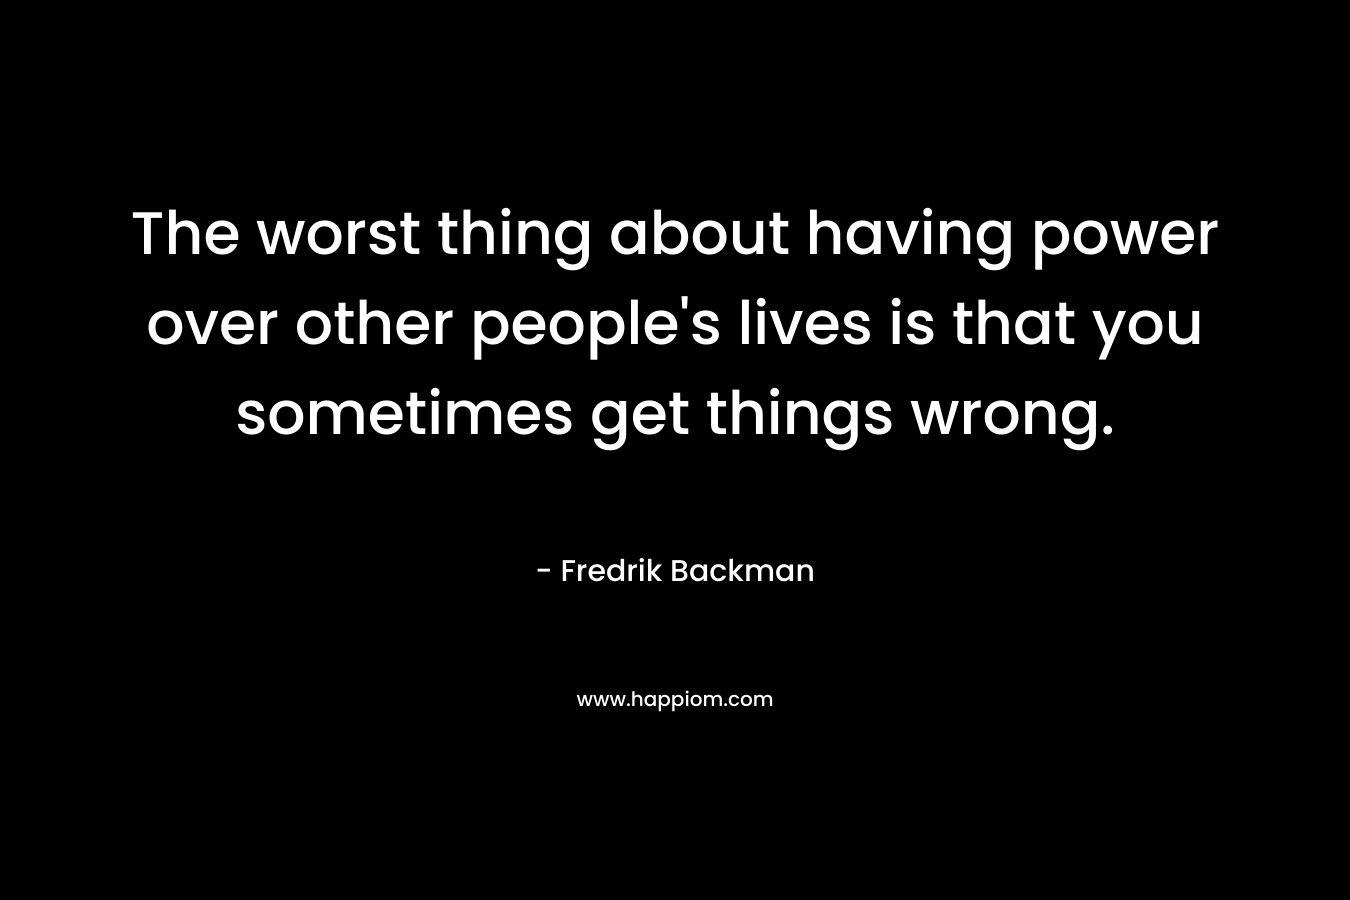 The worst thing about having power over other people's lives is that you sometimes get things wrong.